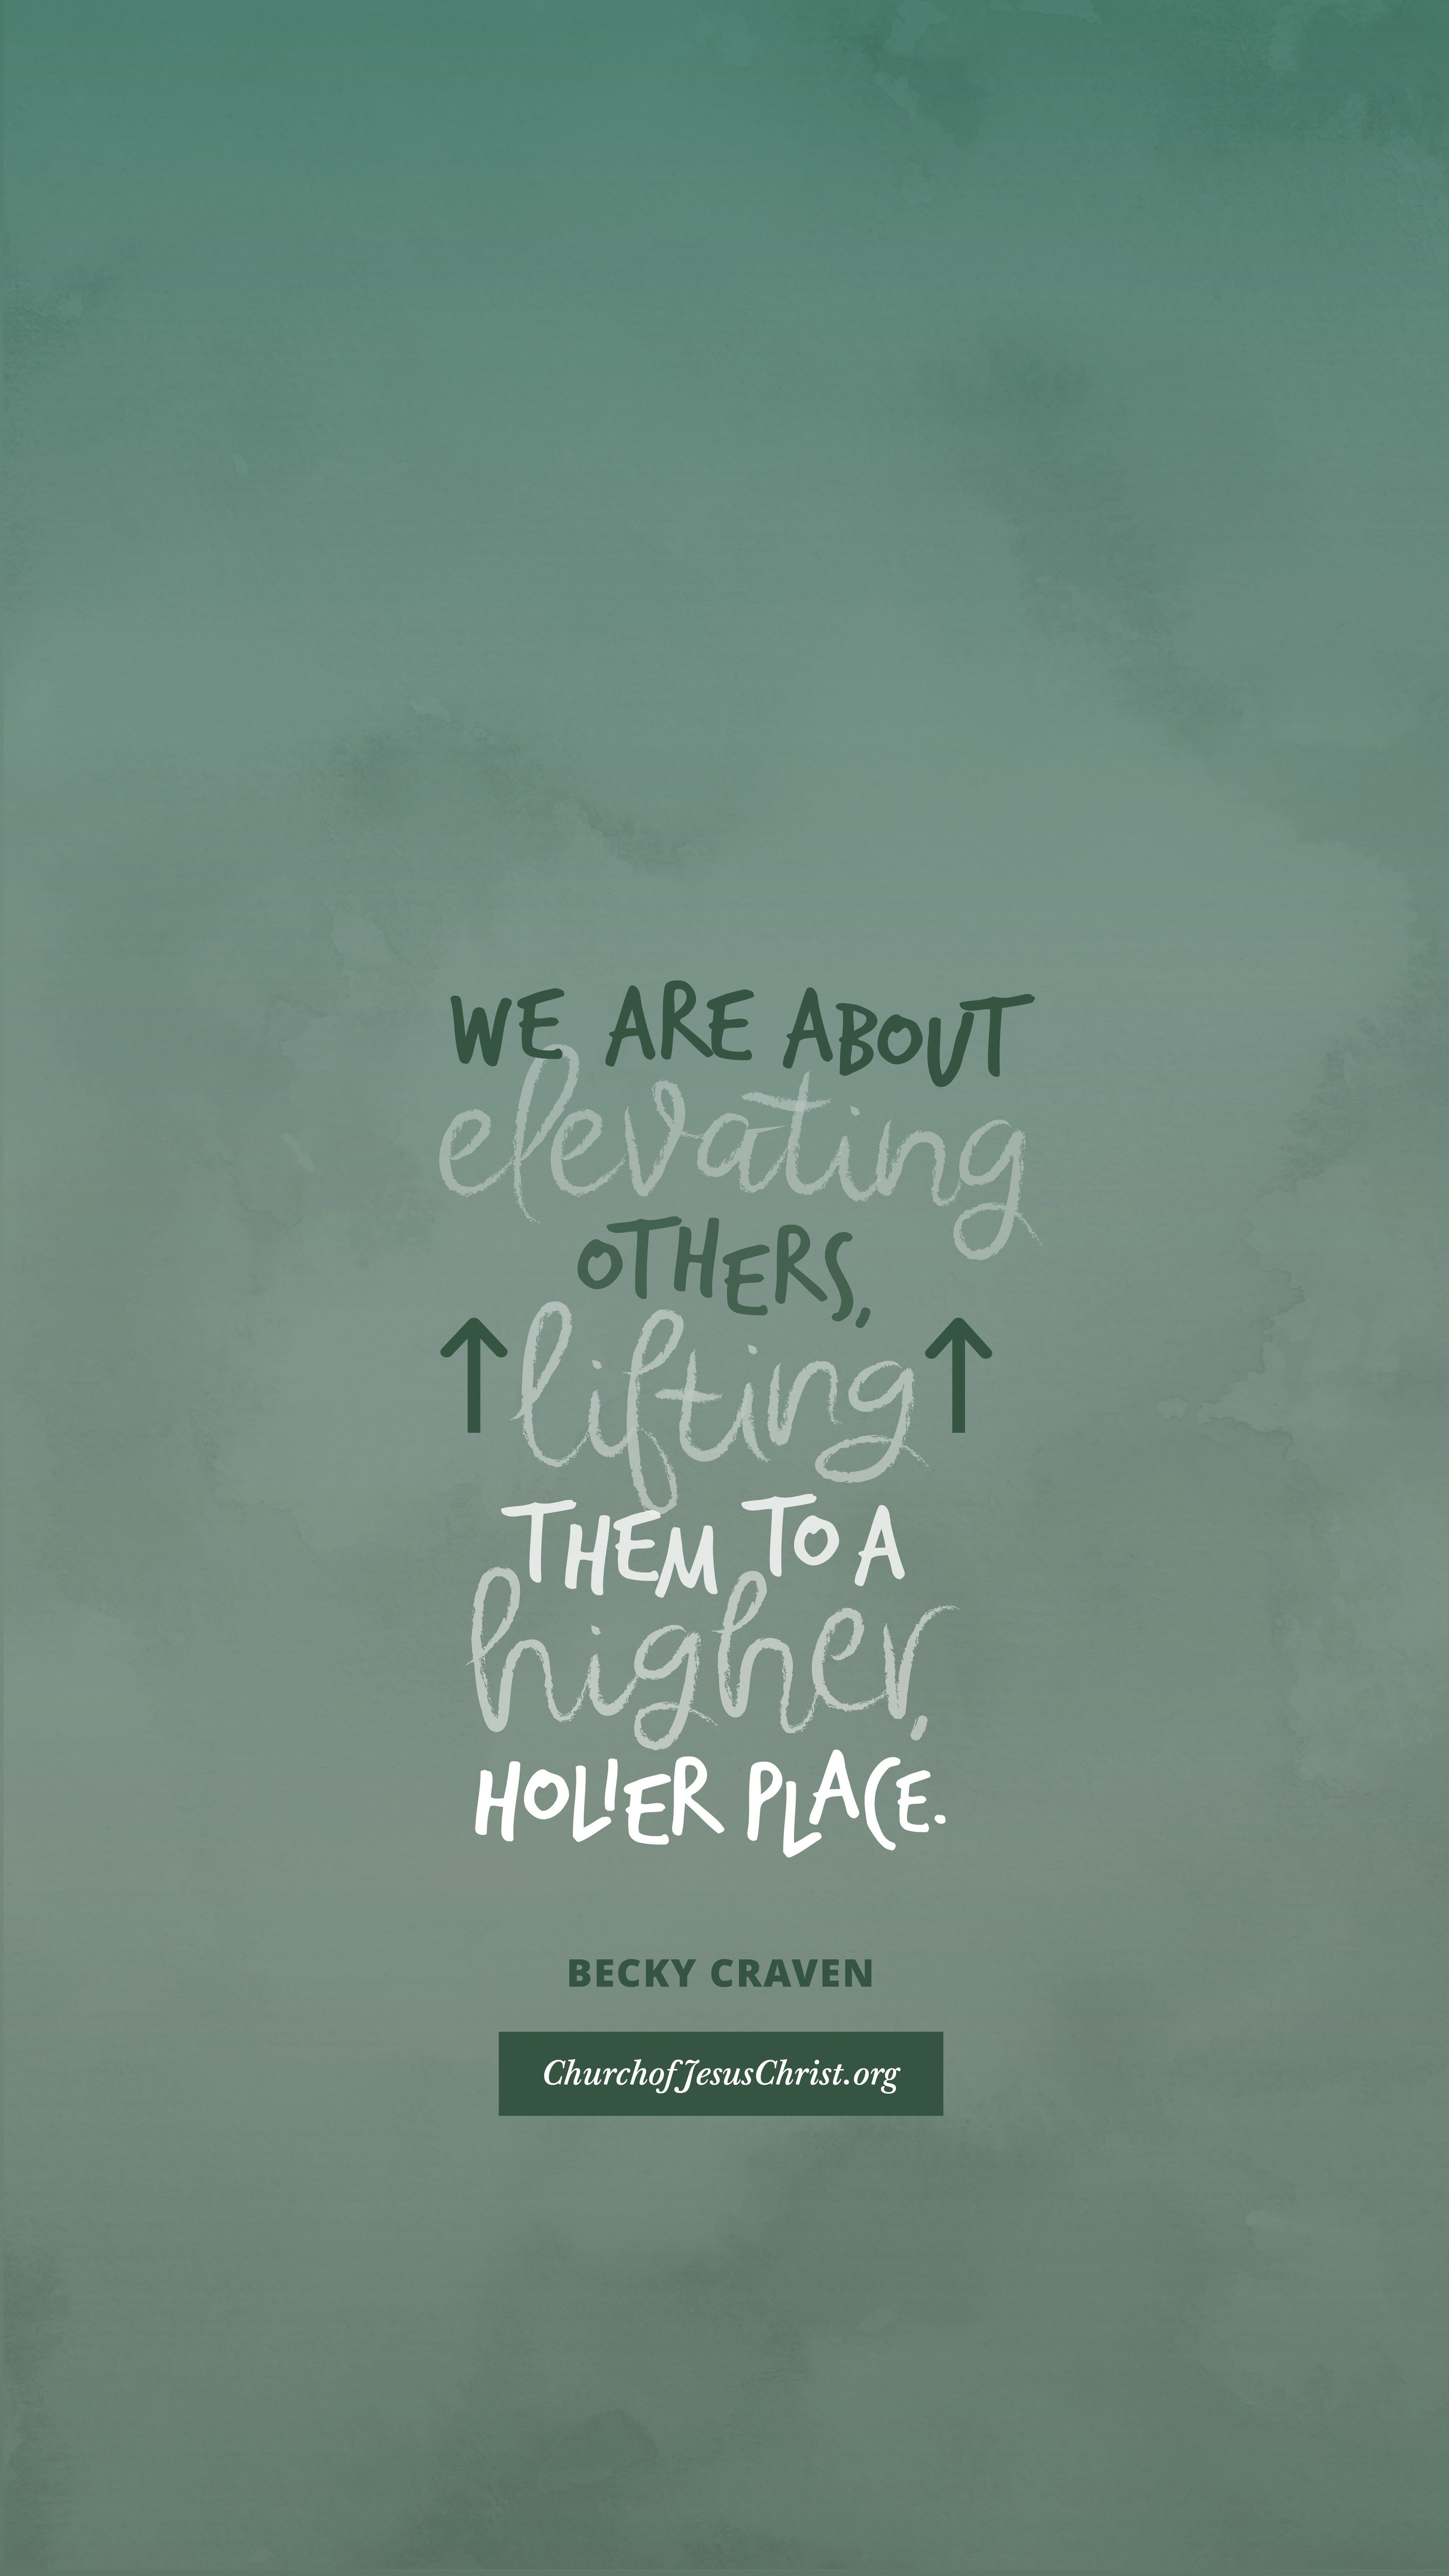 "We are about elevating others, lifting them to a higher, holier place." —Becky Craven